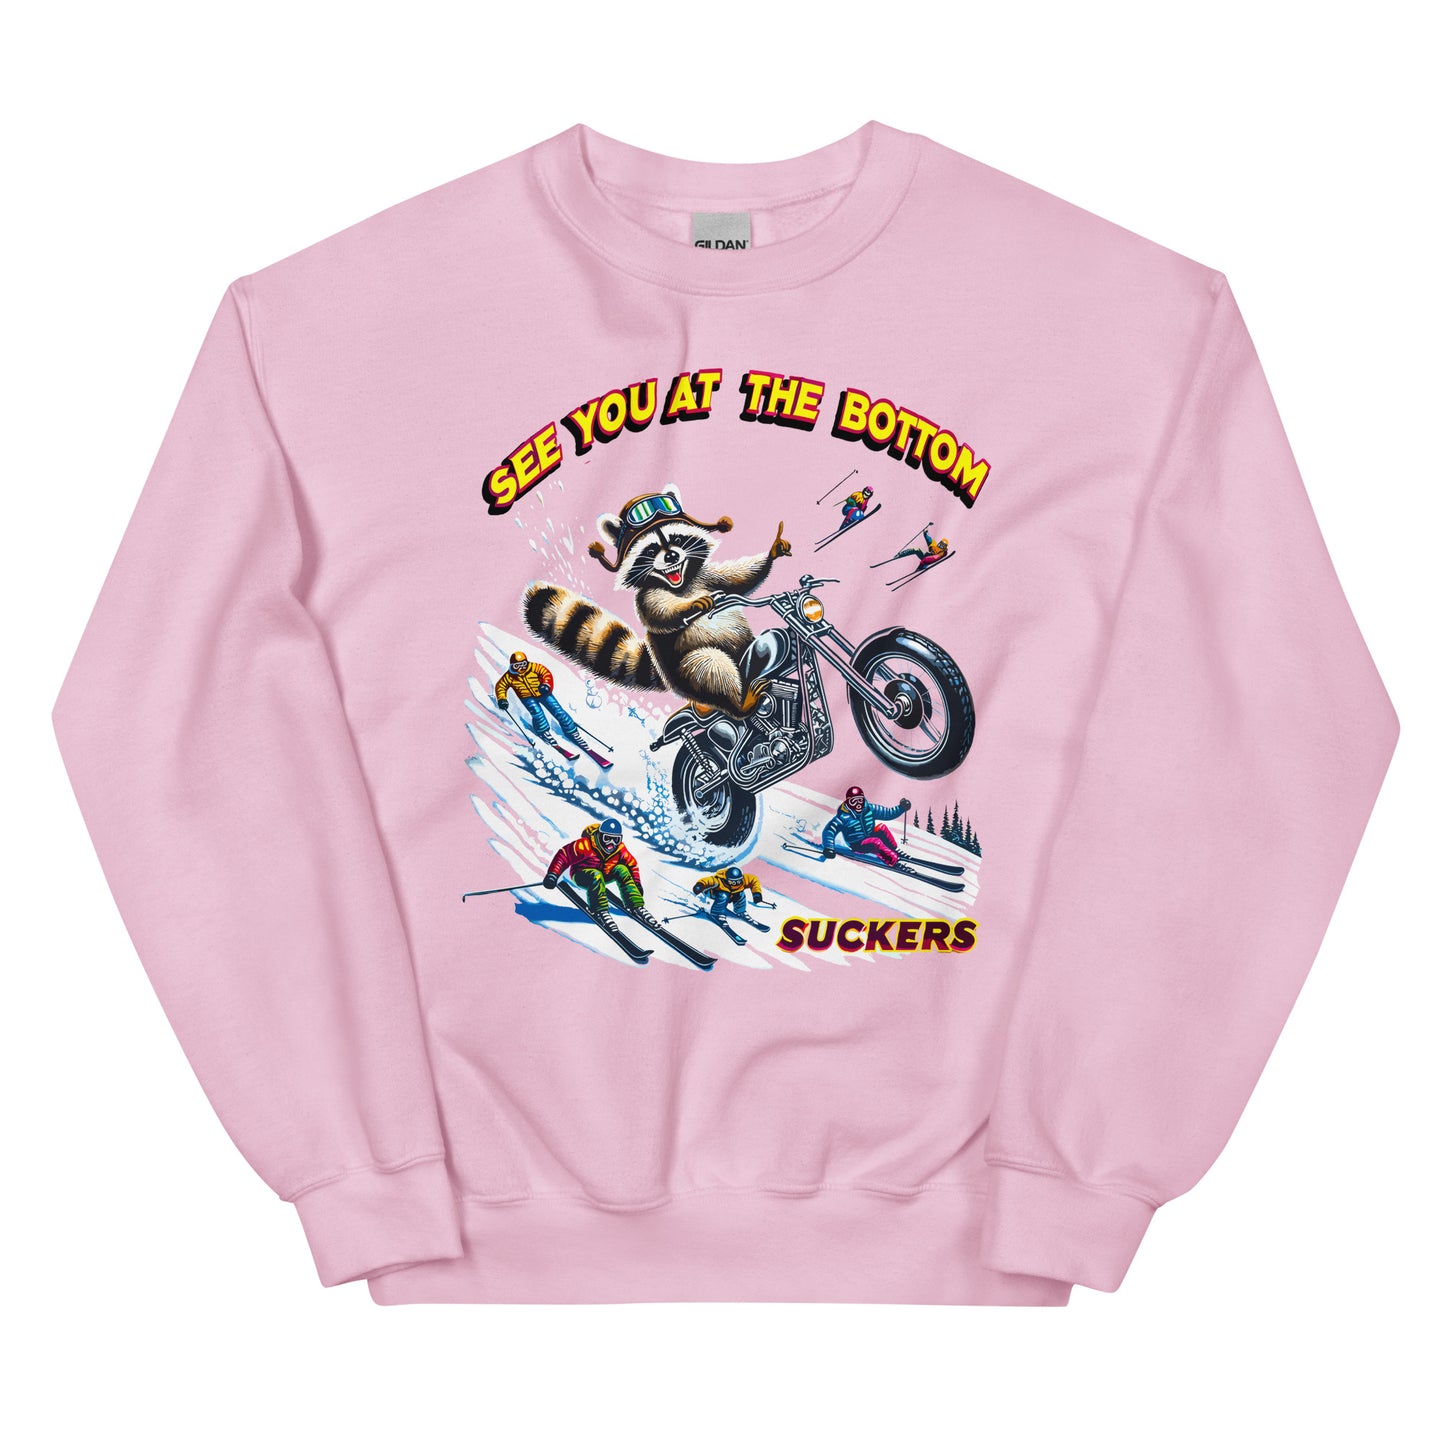 See you at the bottom suckers, racoon biking down the mountain printed crewneck sweatshirt by Whistler Shirts